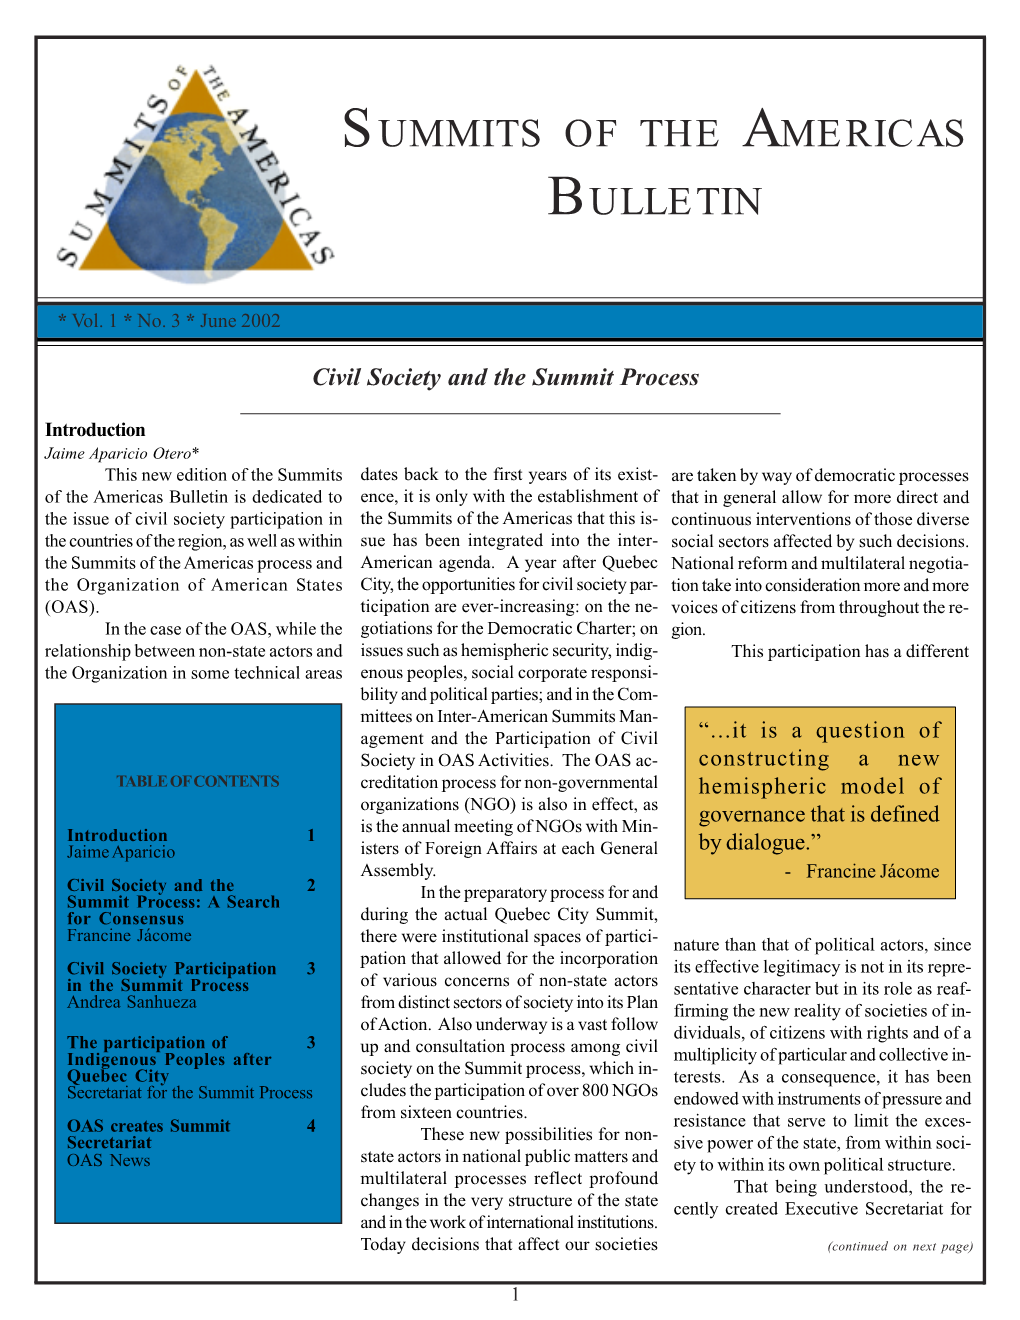 Summits of the Americas Bulletin